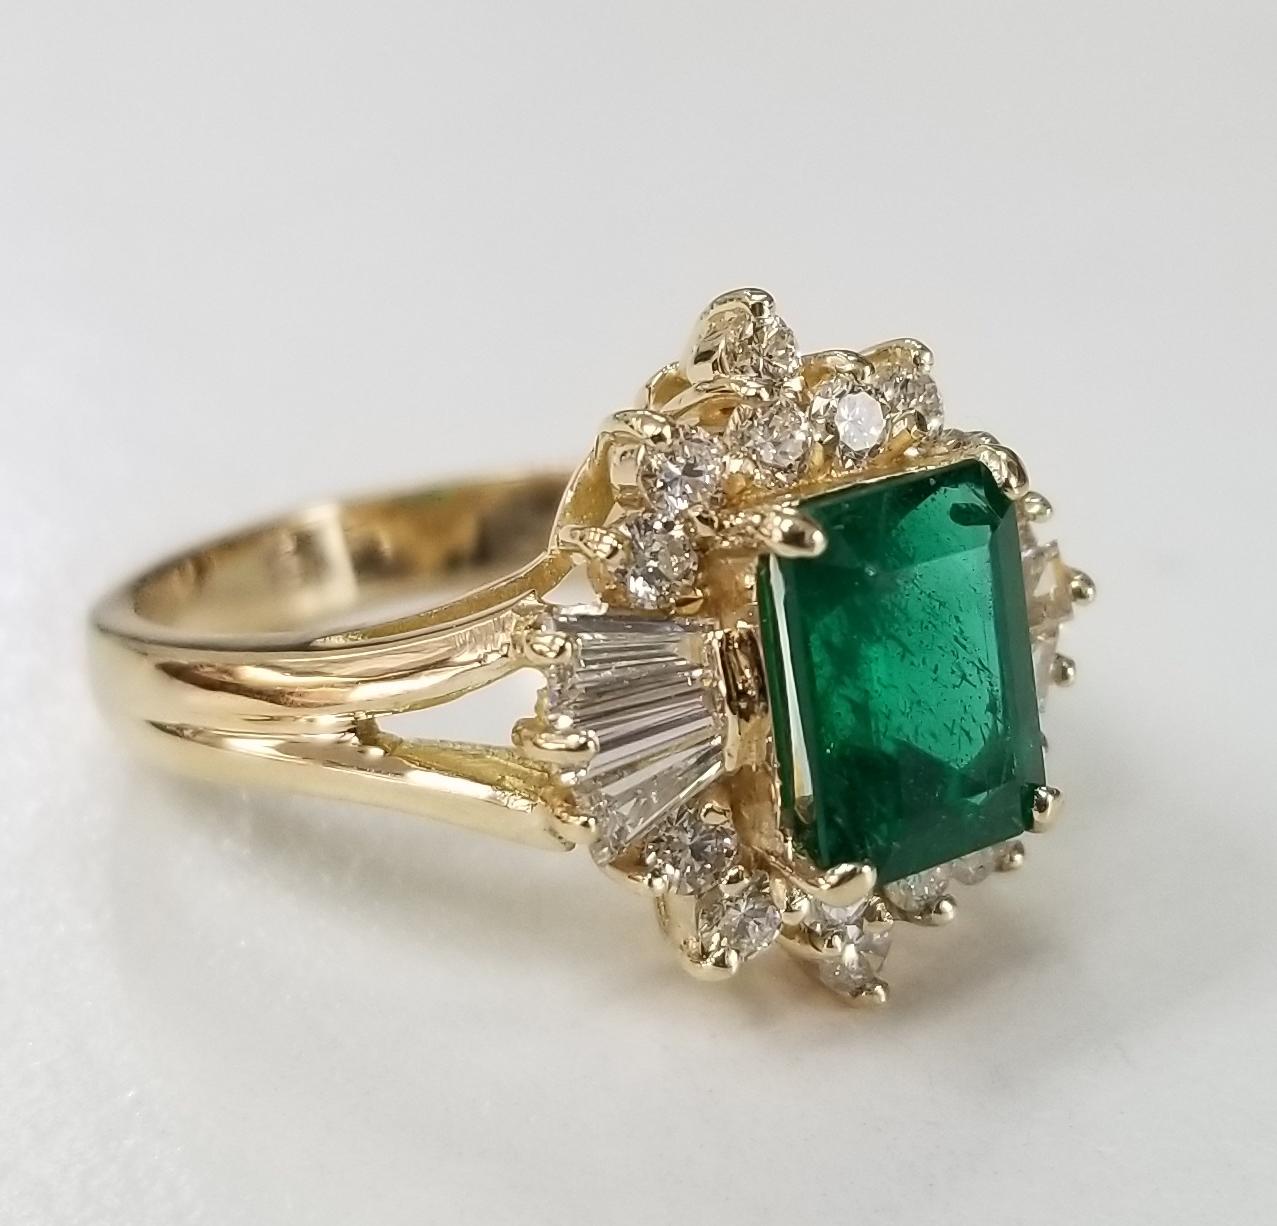 14 karat yellow gold emerald diamond ring, containing 1 GIA emerald cut emerald of gem quality weighing 1.59cts.,surrounded with 14 round full cut and 6 baguette cut diamonds diamonds of fine quality weighing .86pts.  This ring is a size 7 but we